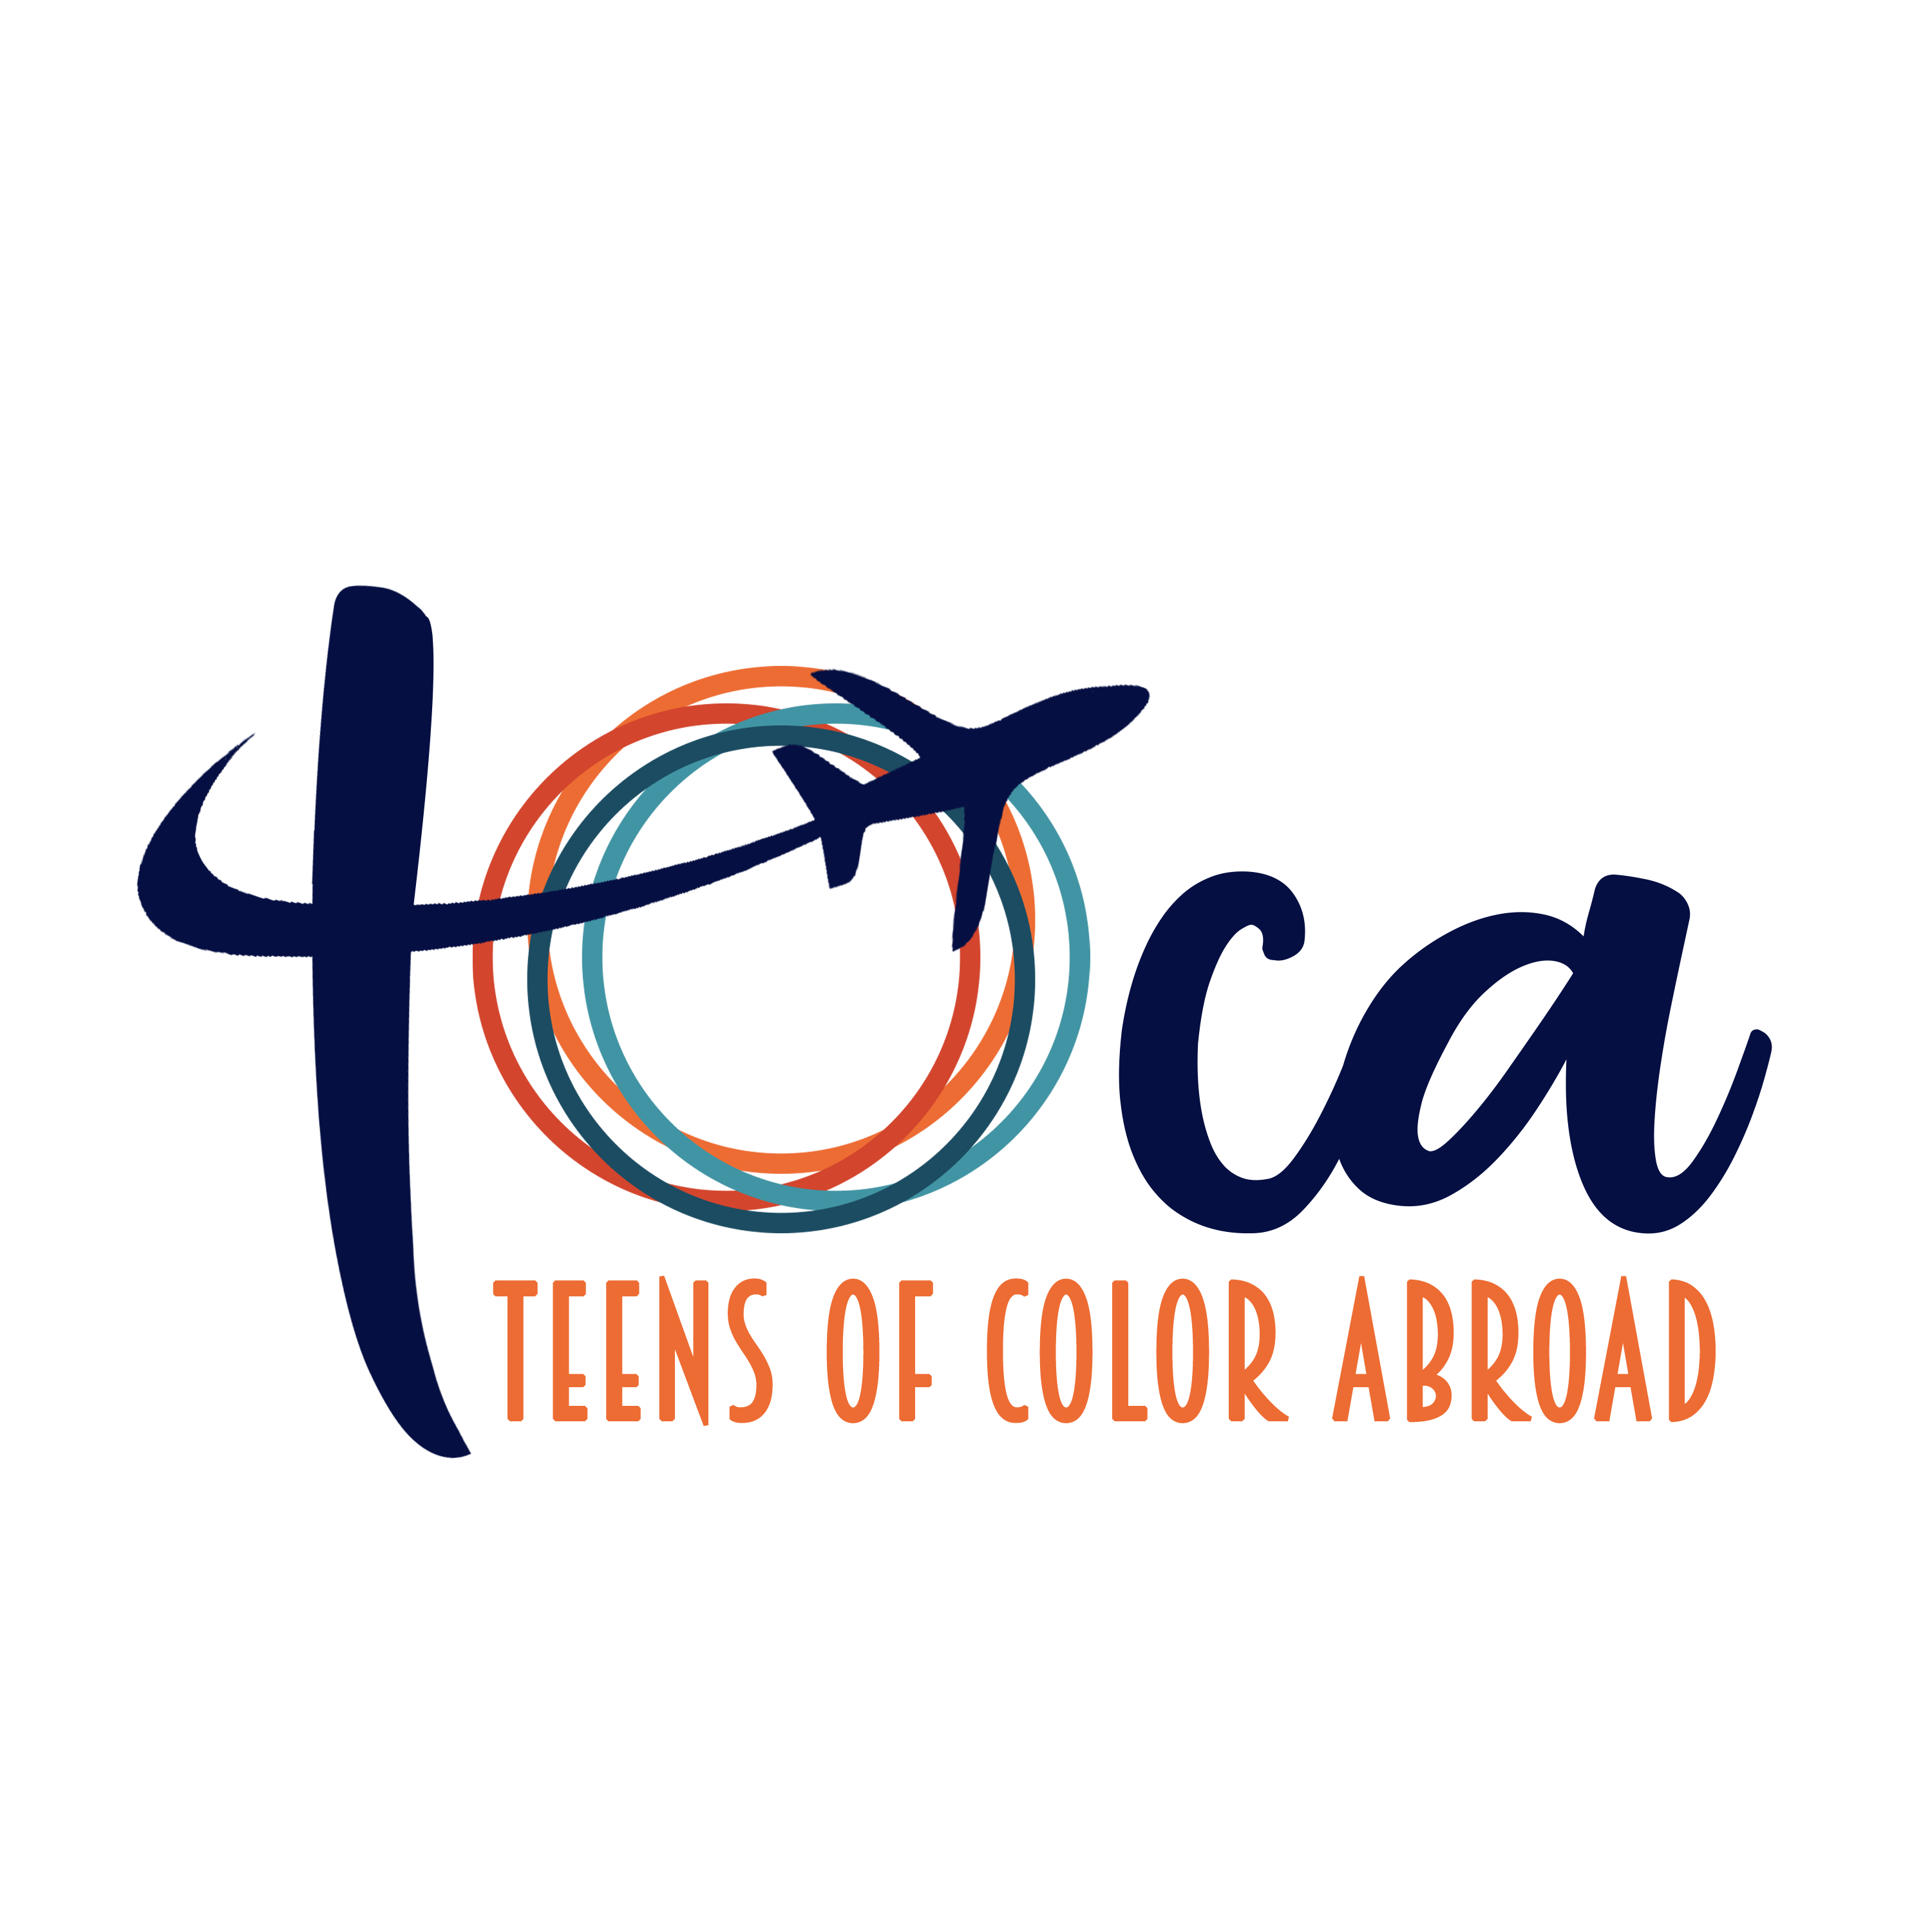 Teens of Color Abroad logo